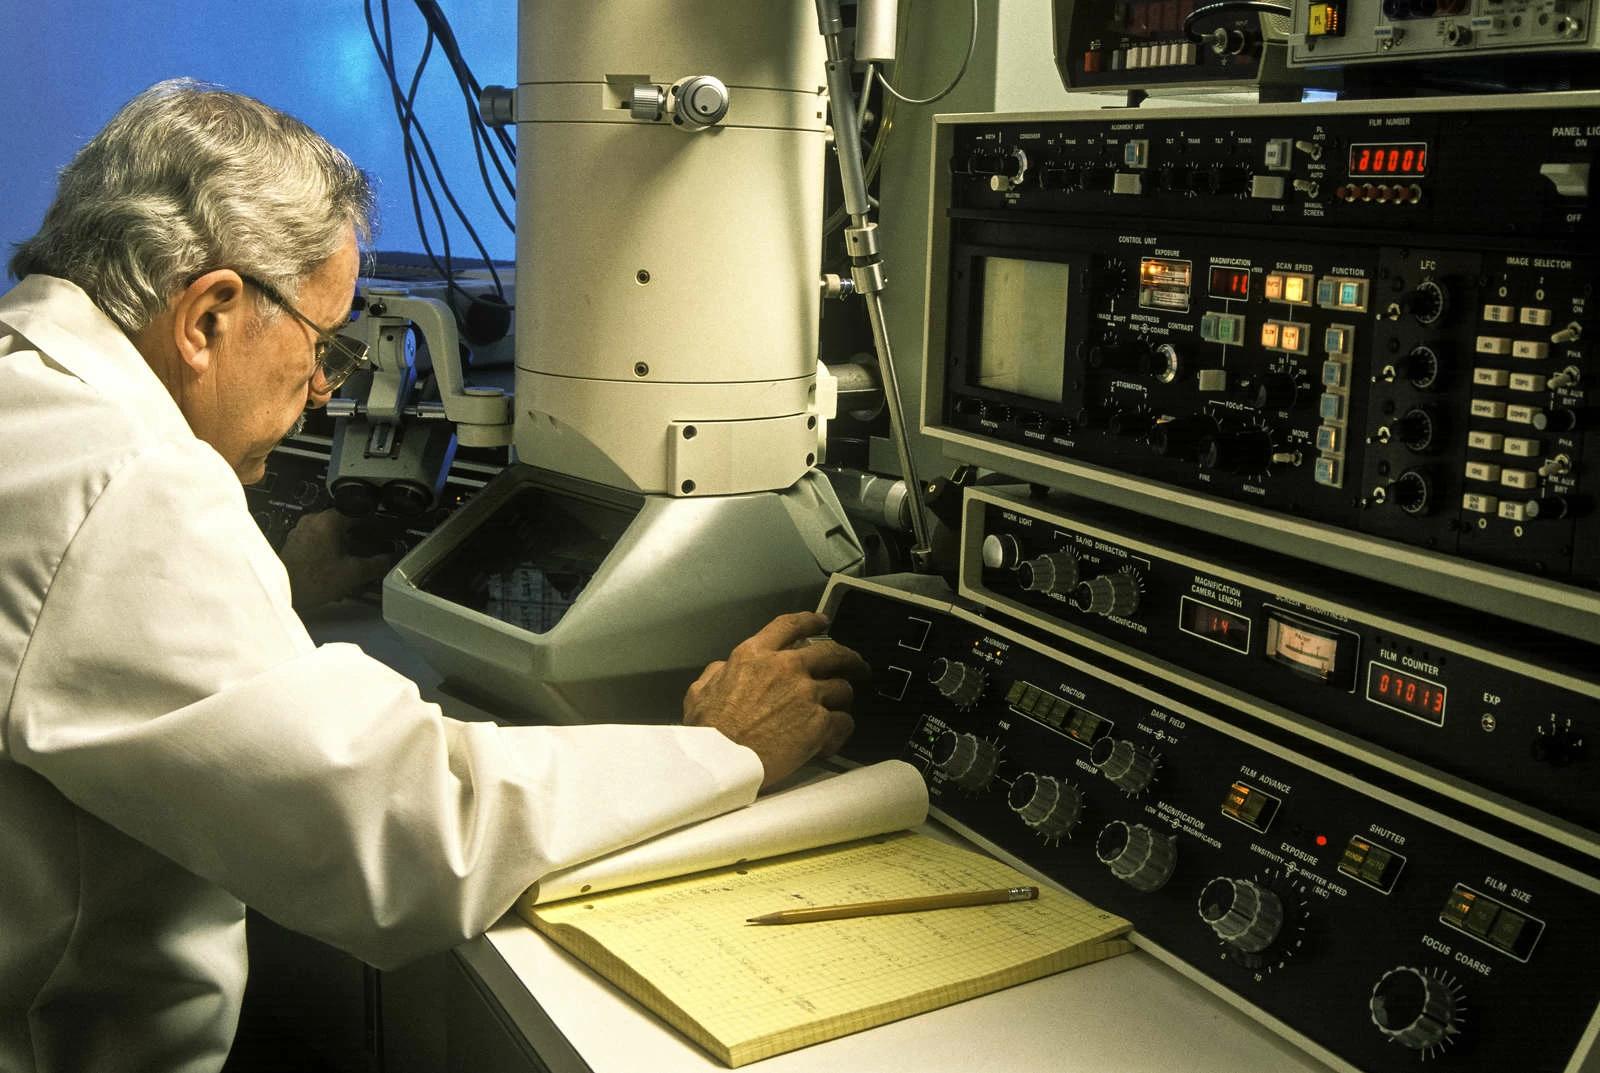 Researcher works at an electron microscope. Photo by
John Greim.